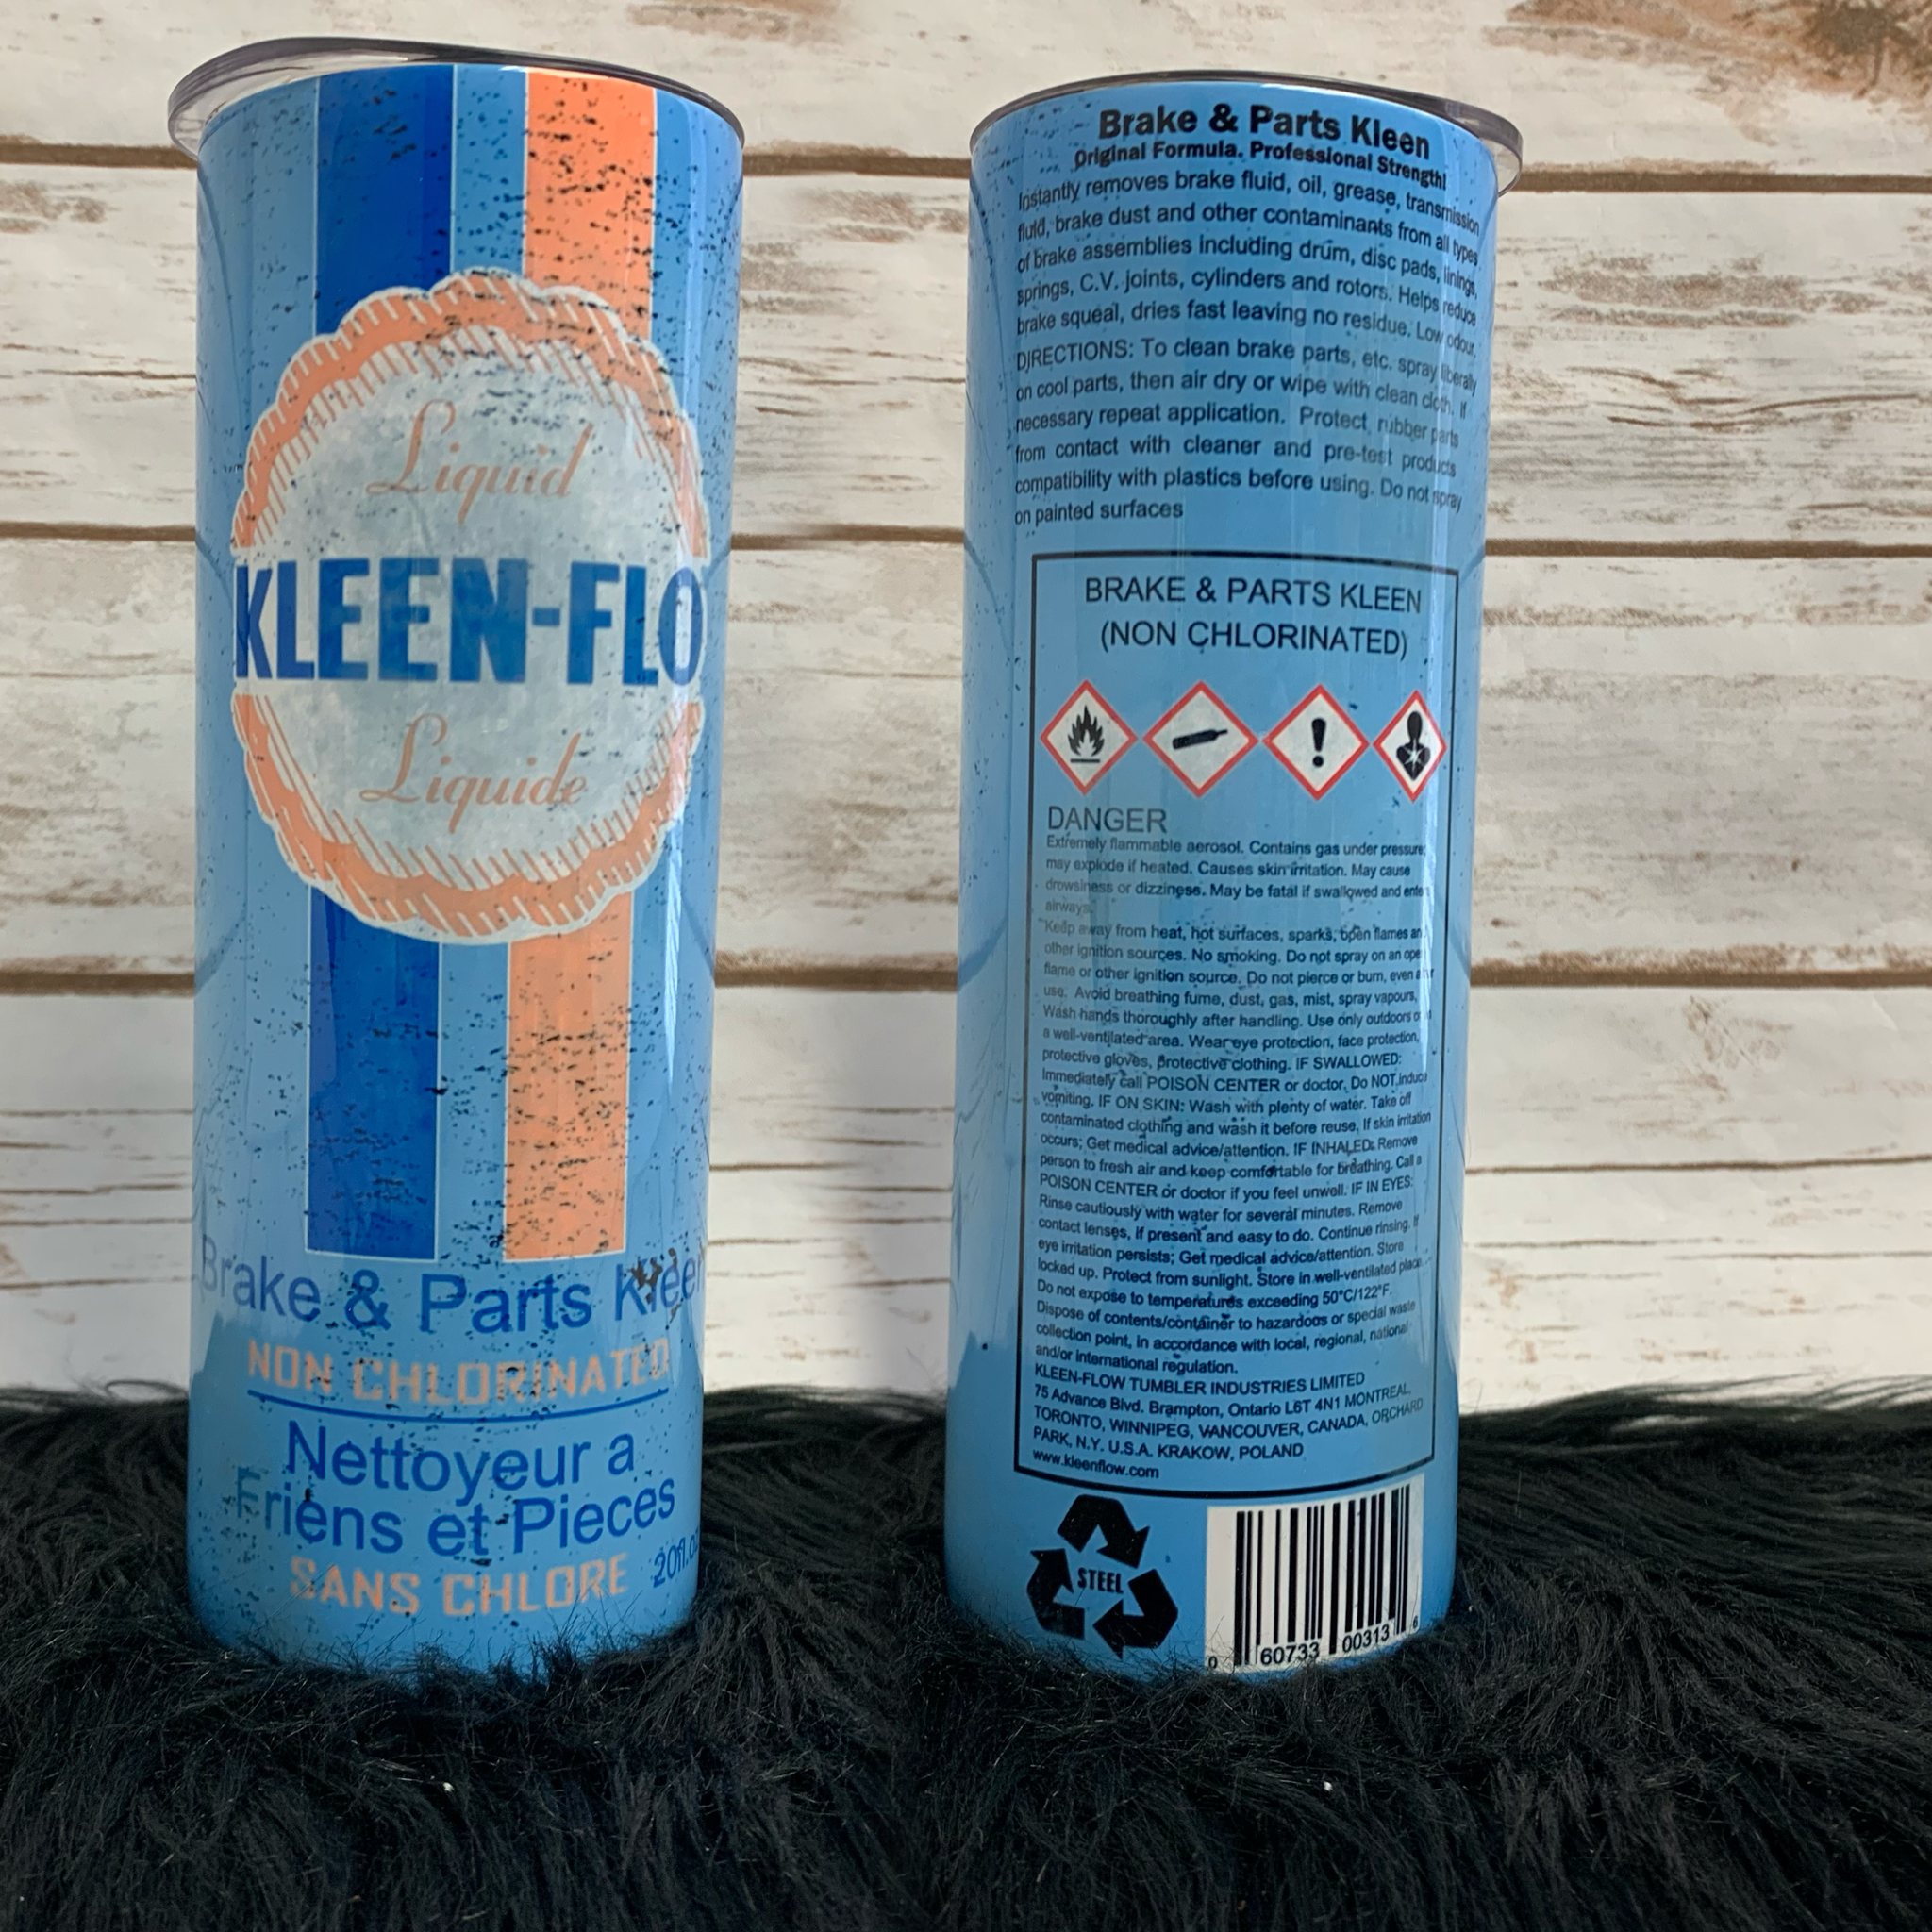 20oz Insulated Tumbler - Kleen-flo Can